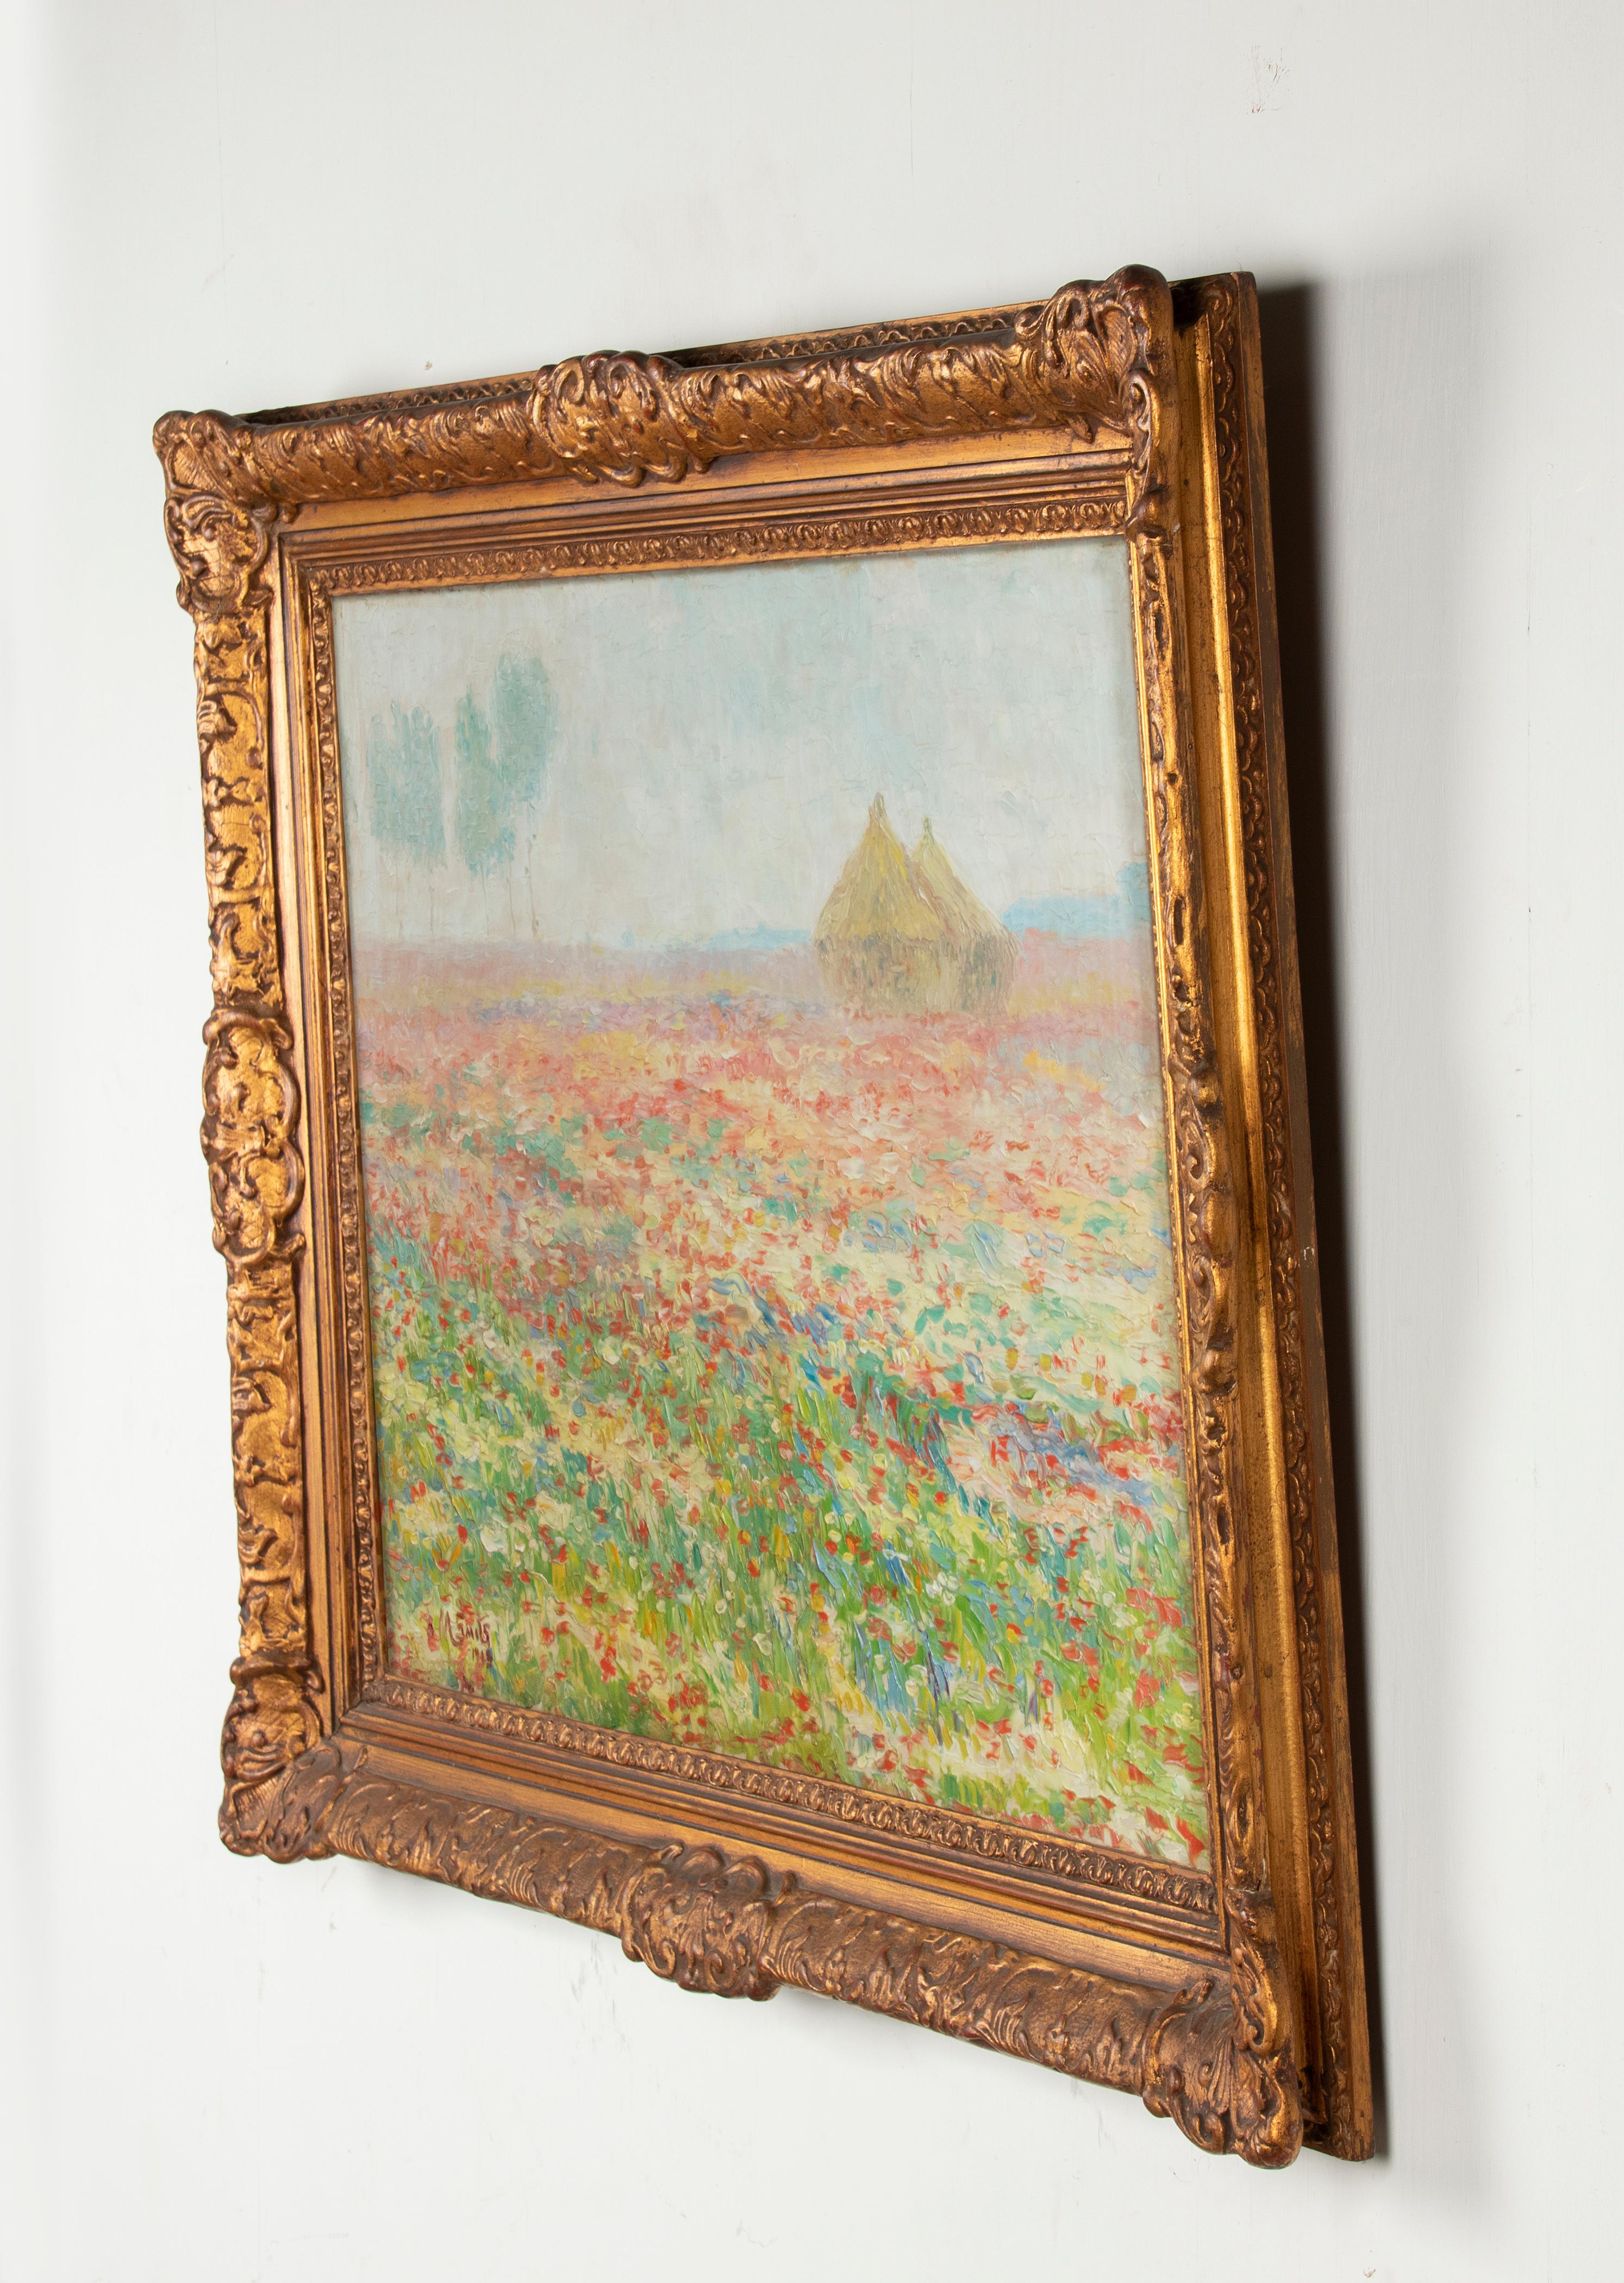 Early 19th Century Impressionistic Painting Signed and Dated E. Smits, 1913 For Sale 5